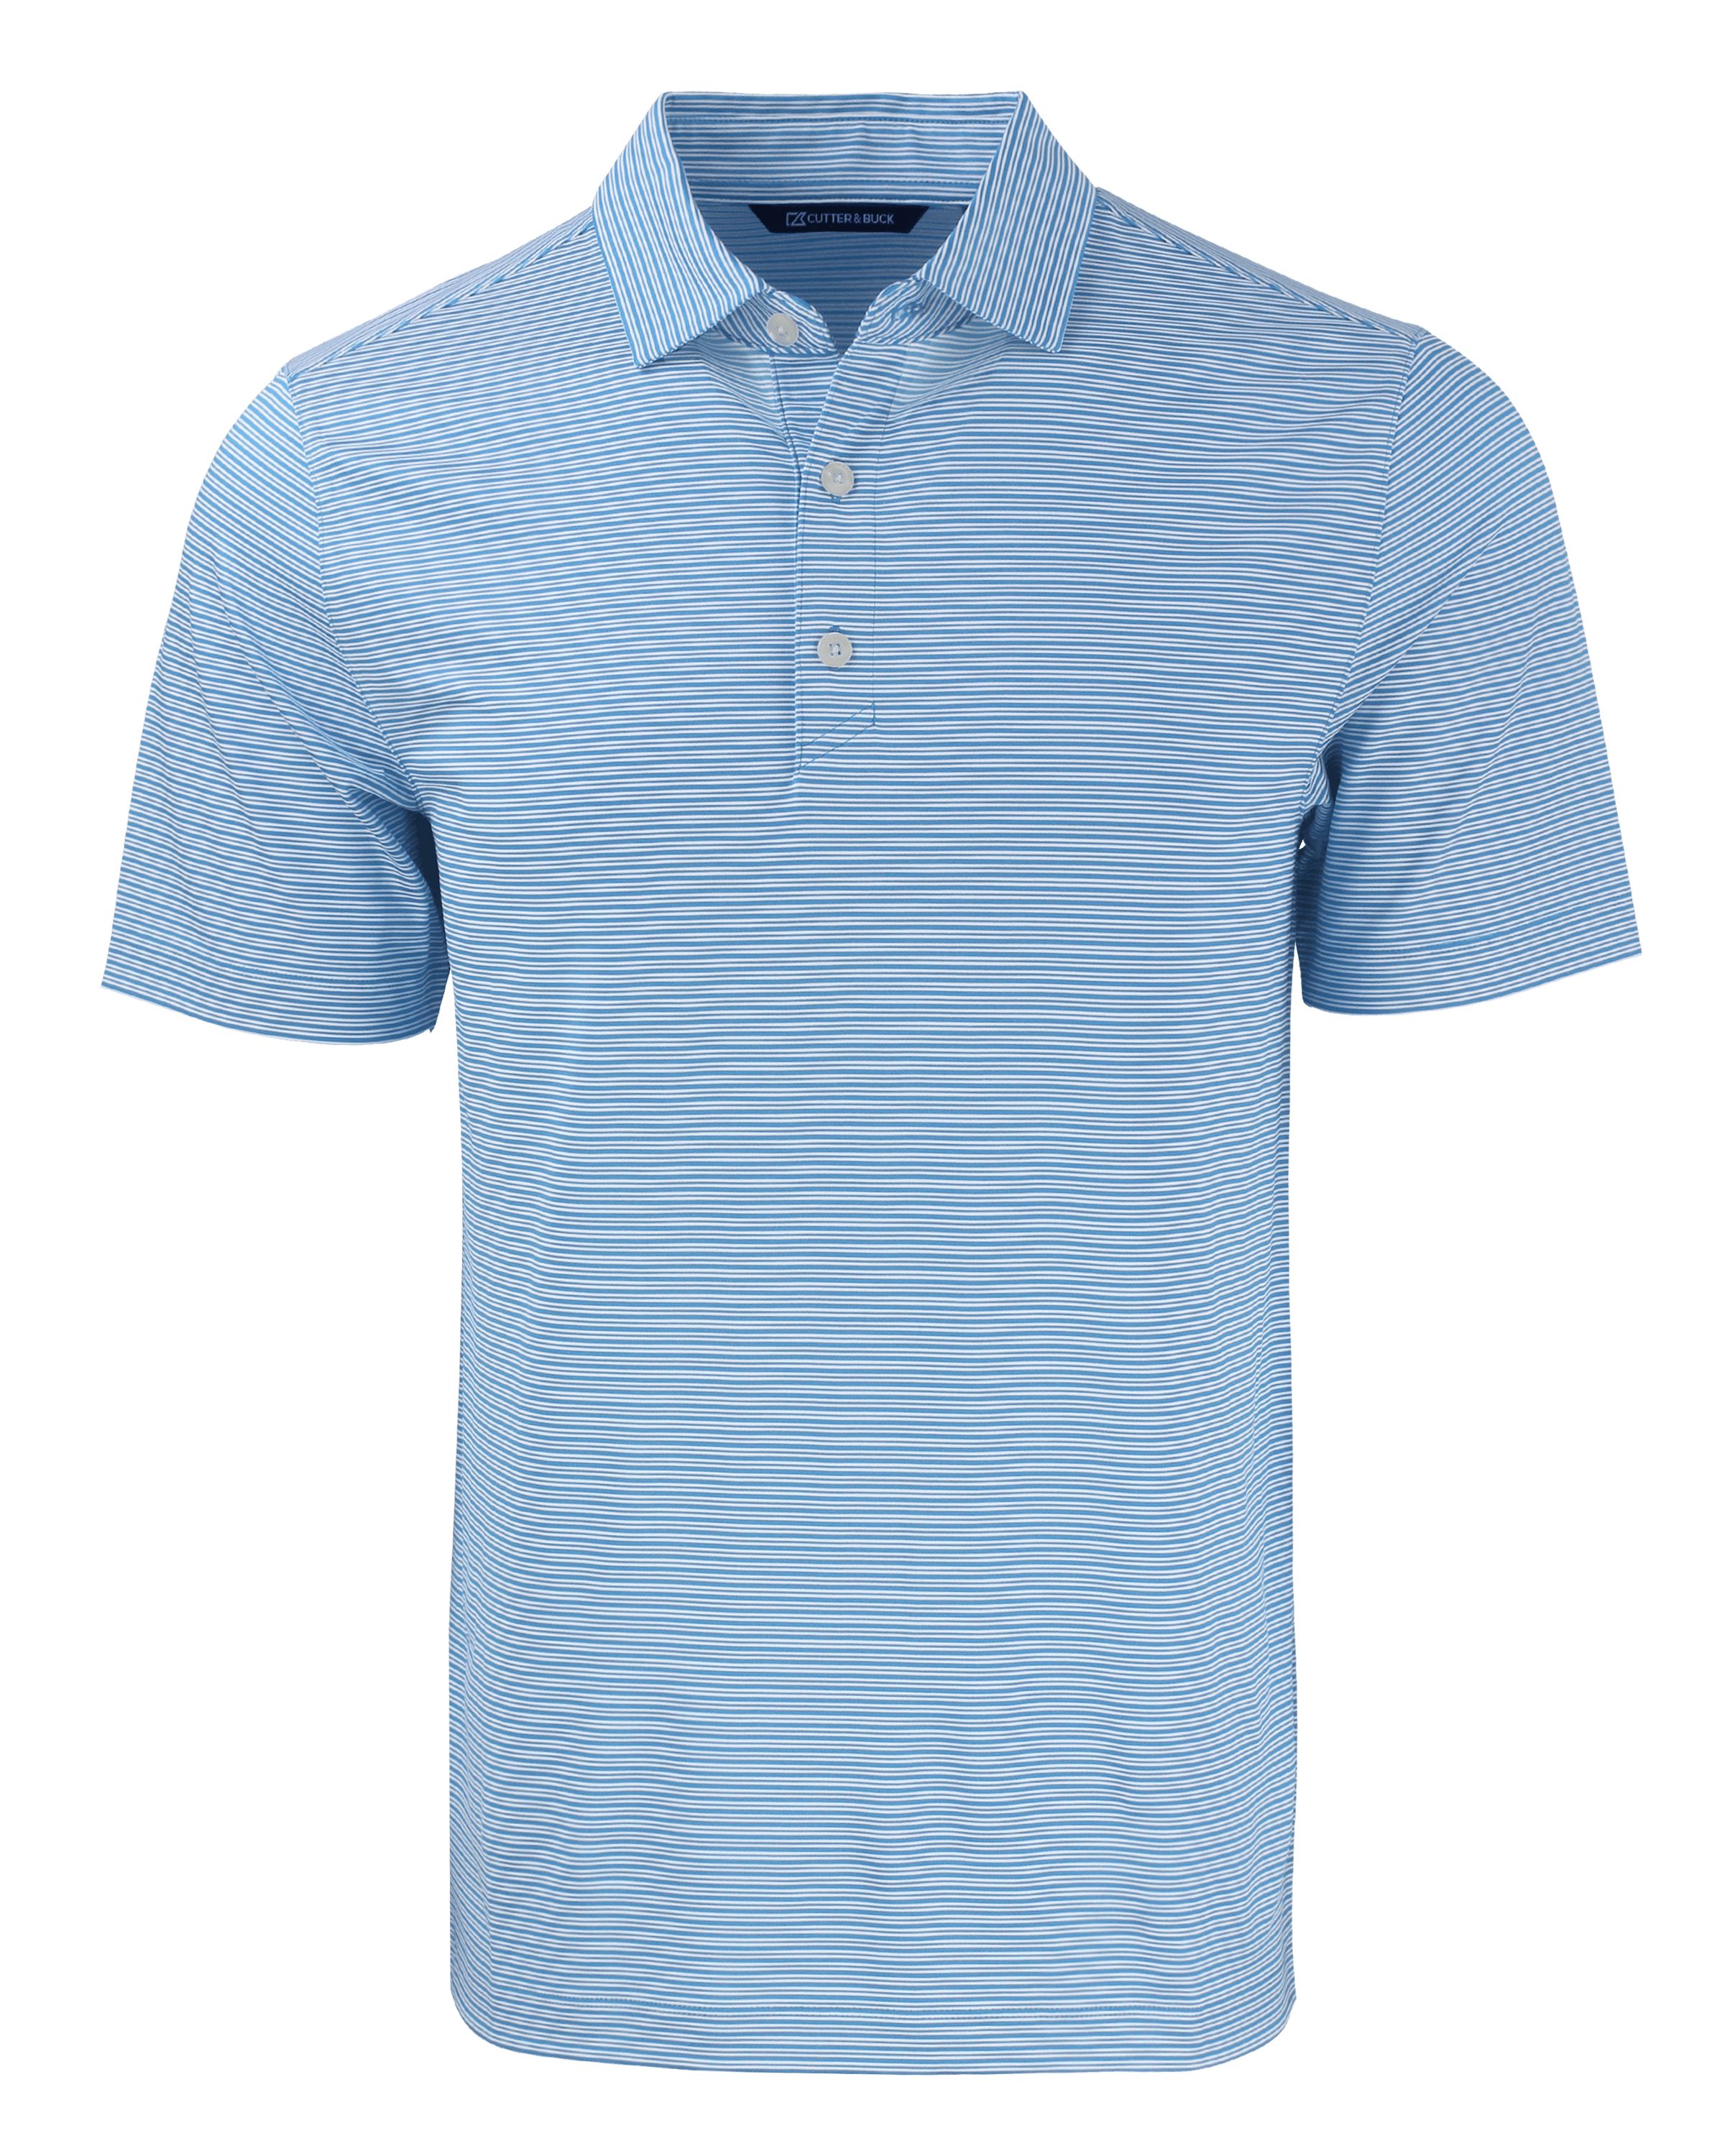 CUTTER & BUCK BCK01302 - Men's Forge Eco Double Stripe Stretch Recycled Big &Tall Polo